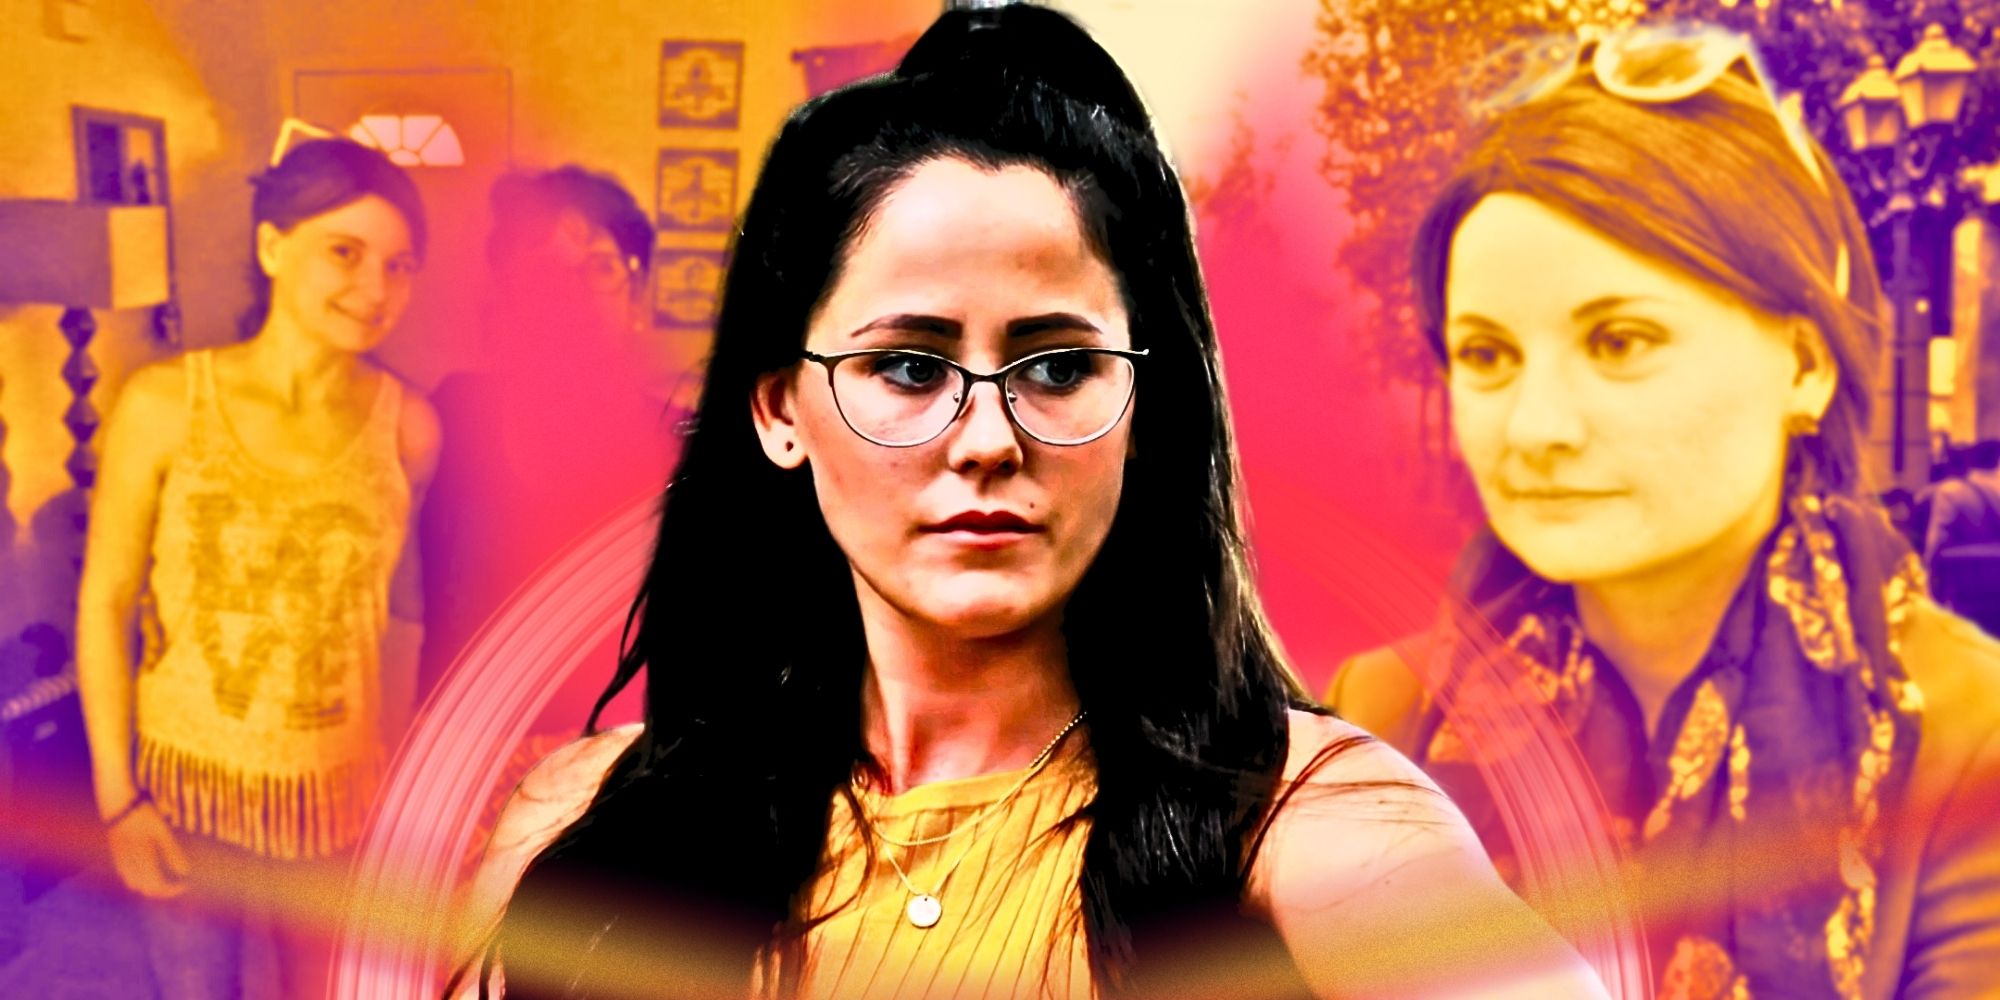 A montage of Teen Mom star Jenelle Evans with her sister Ashleigh Evans.